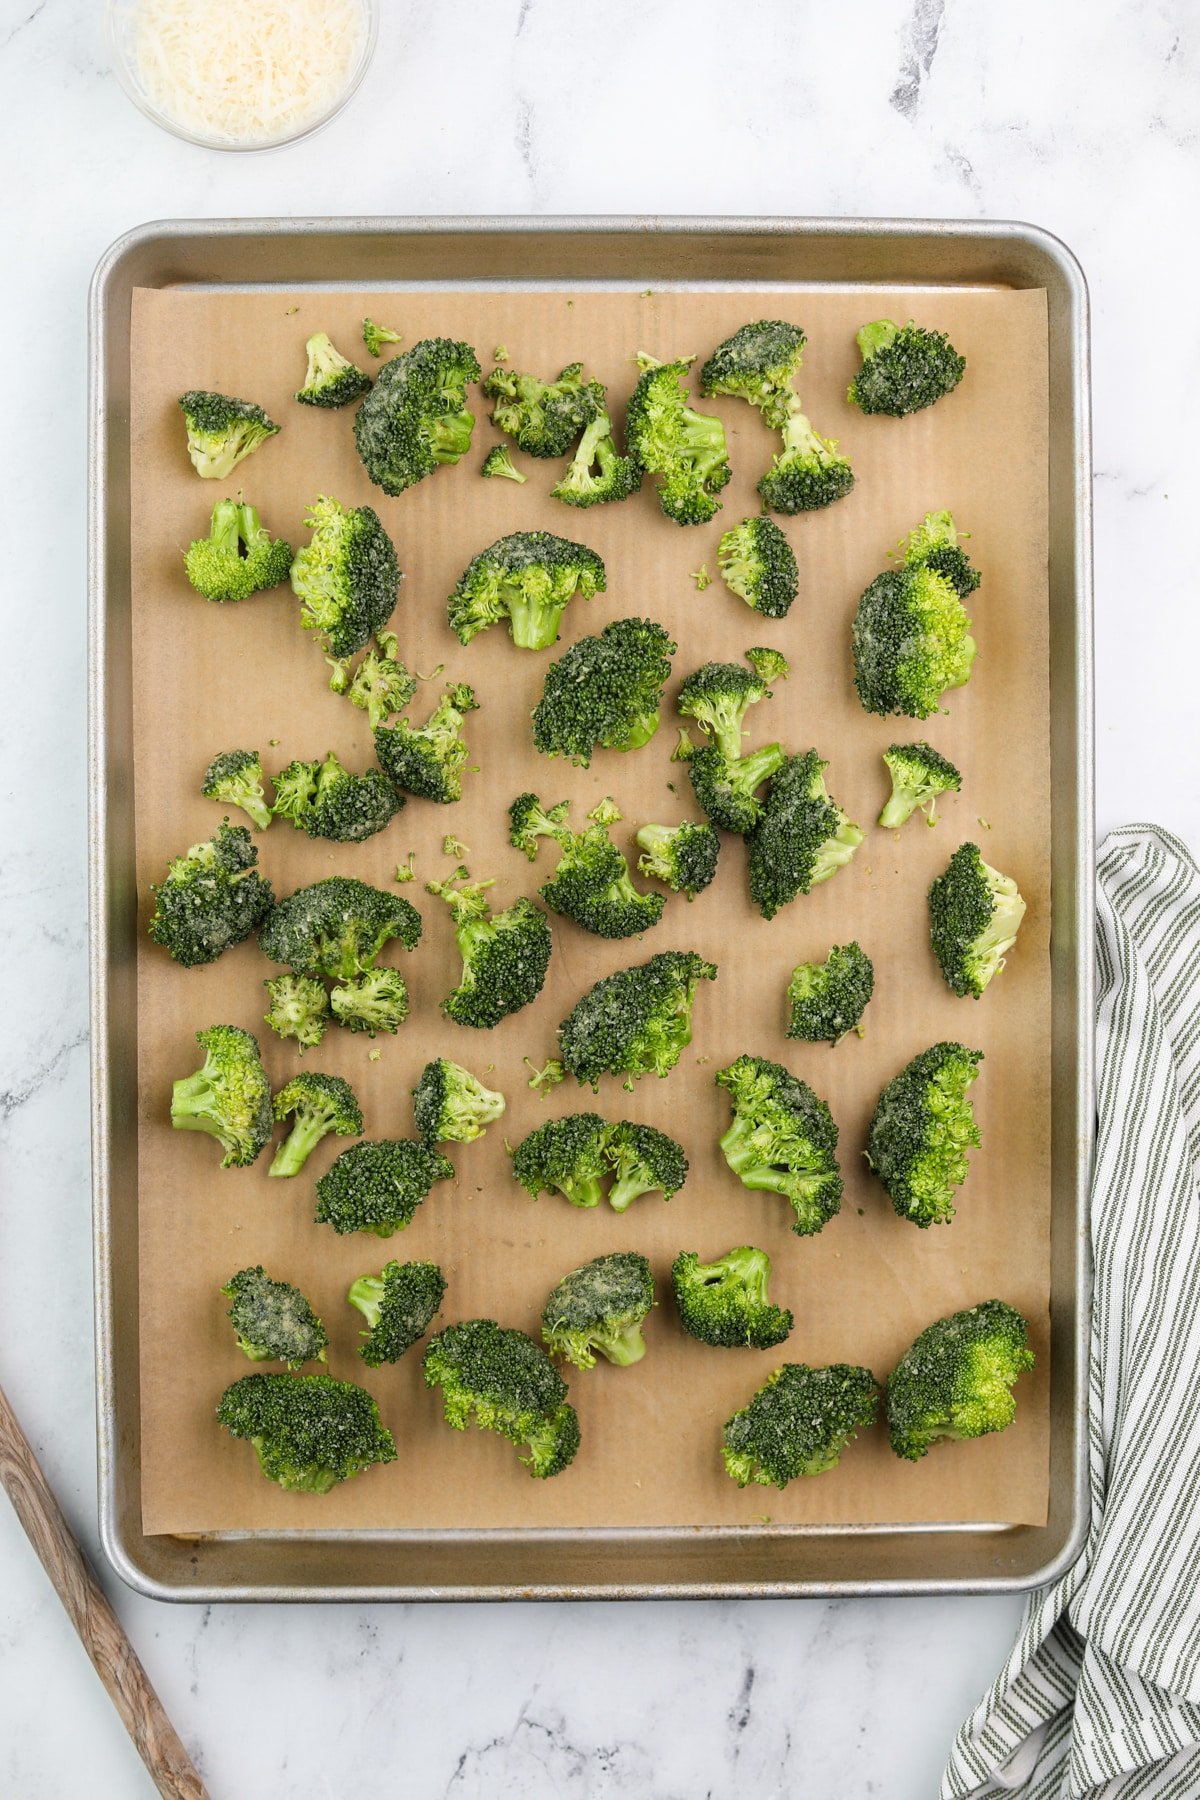 Broccoli florets spread onto a lined baking dish.